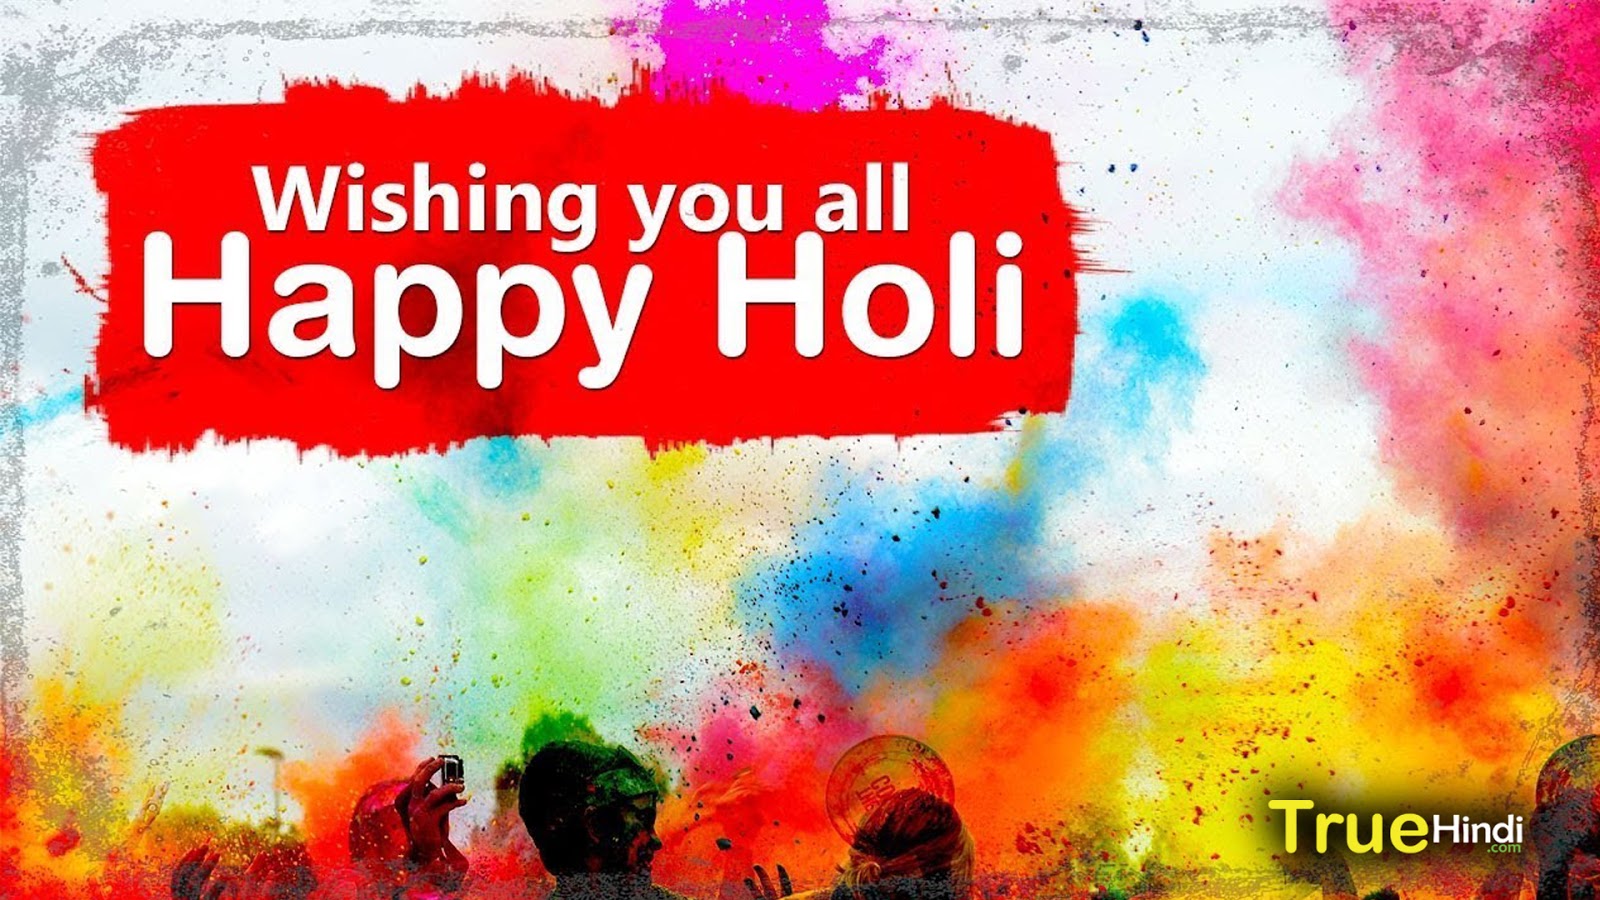 Happy Holi Images Hd Picture Photo Wallpapers Holi 2021